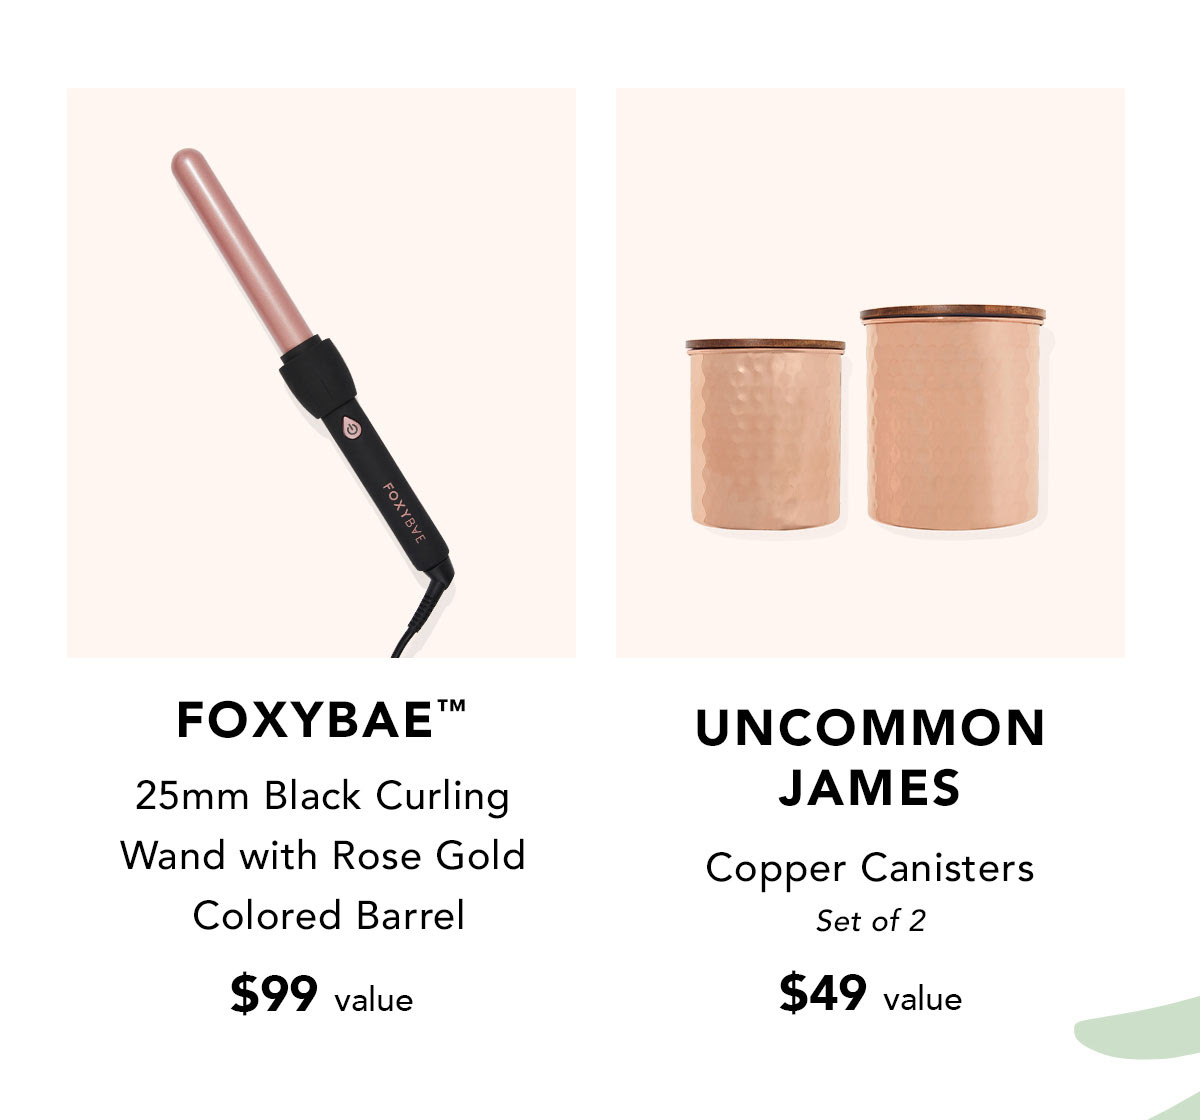 FOXYBAE™ 25mm Black Curling Wand with Rose Gold Colored Barrel $99 value | Uncommon James Set of 2 Copper Canisters $49 value